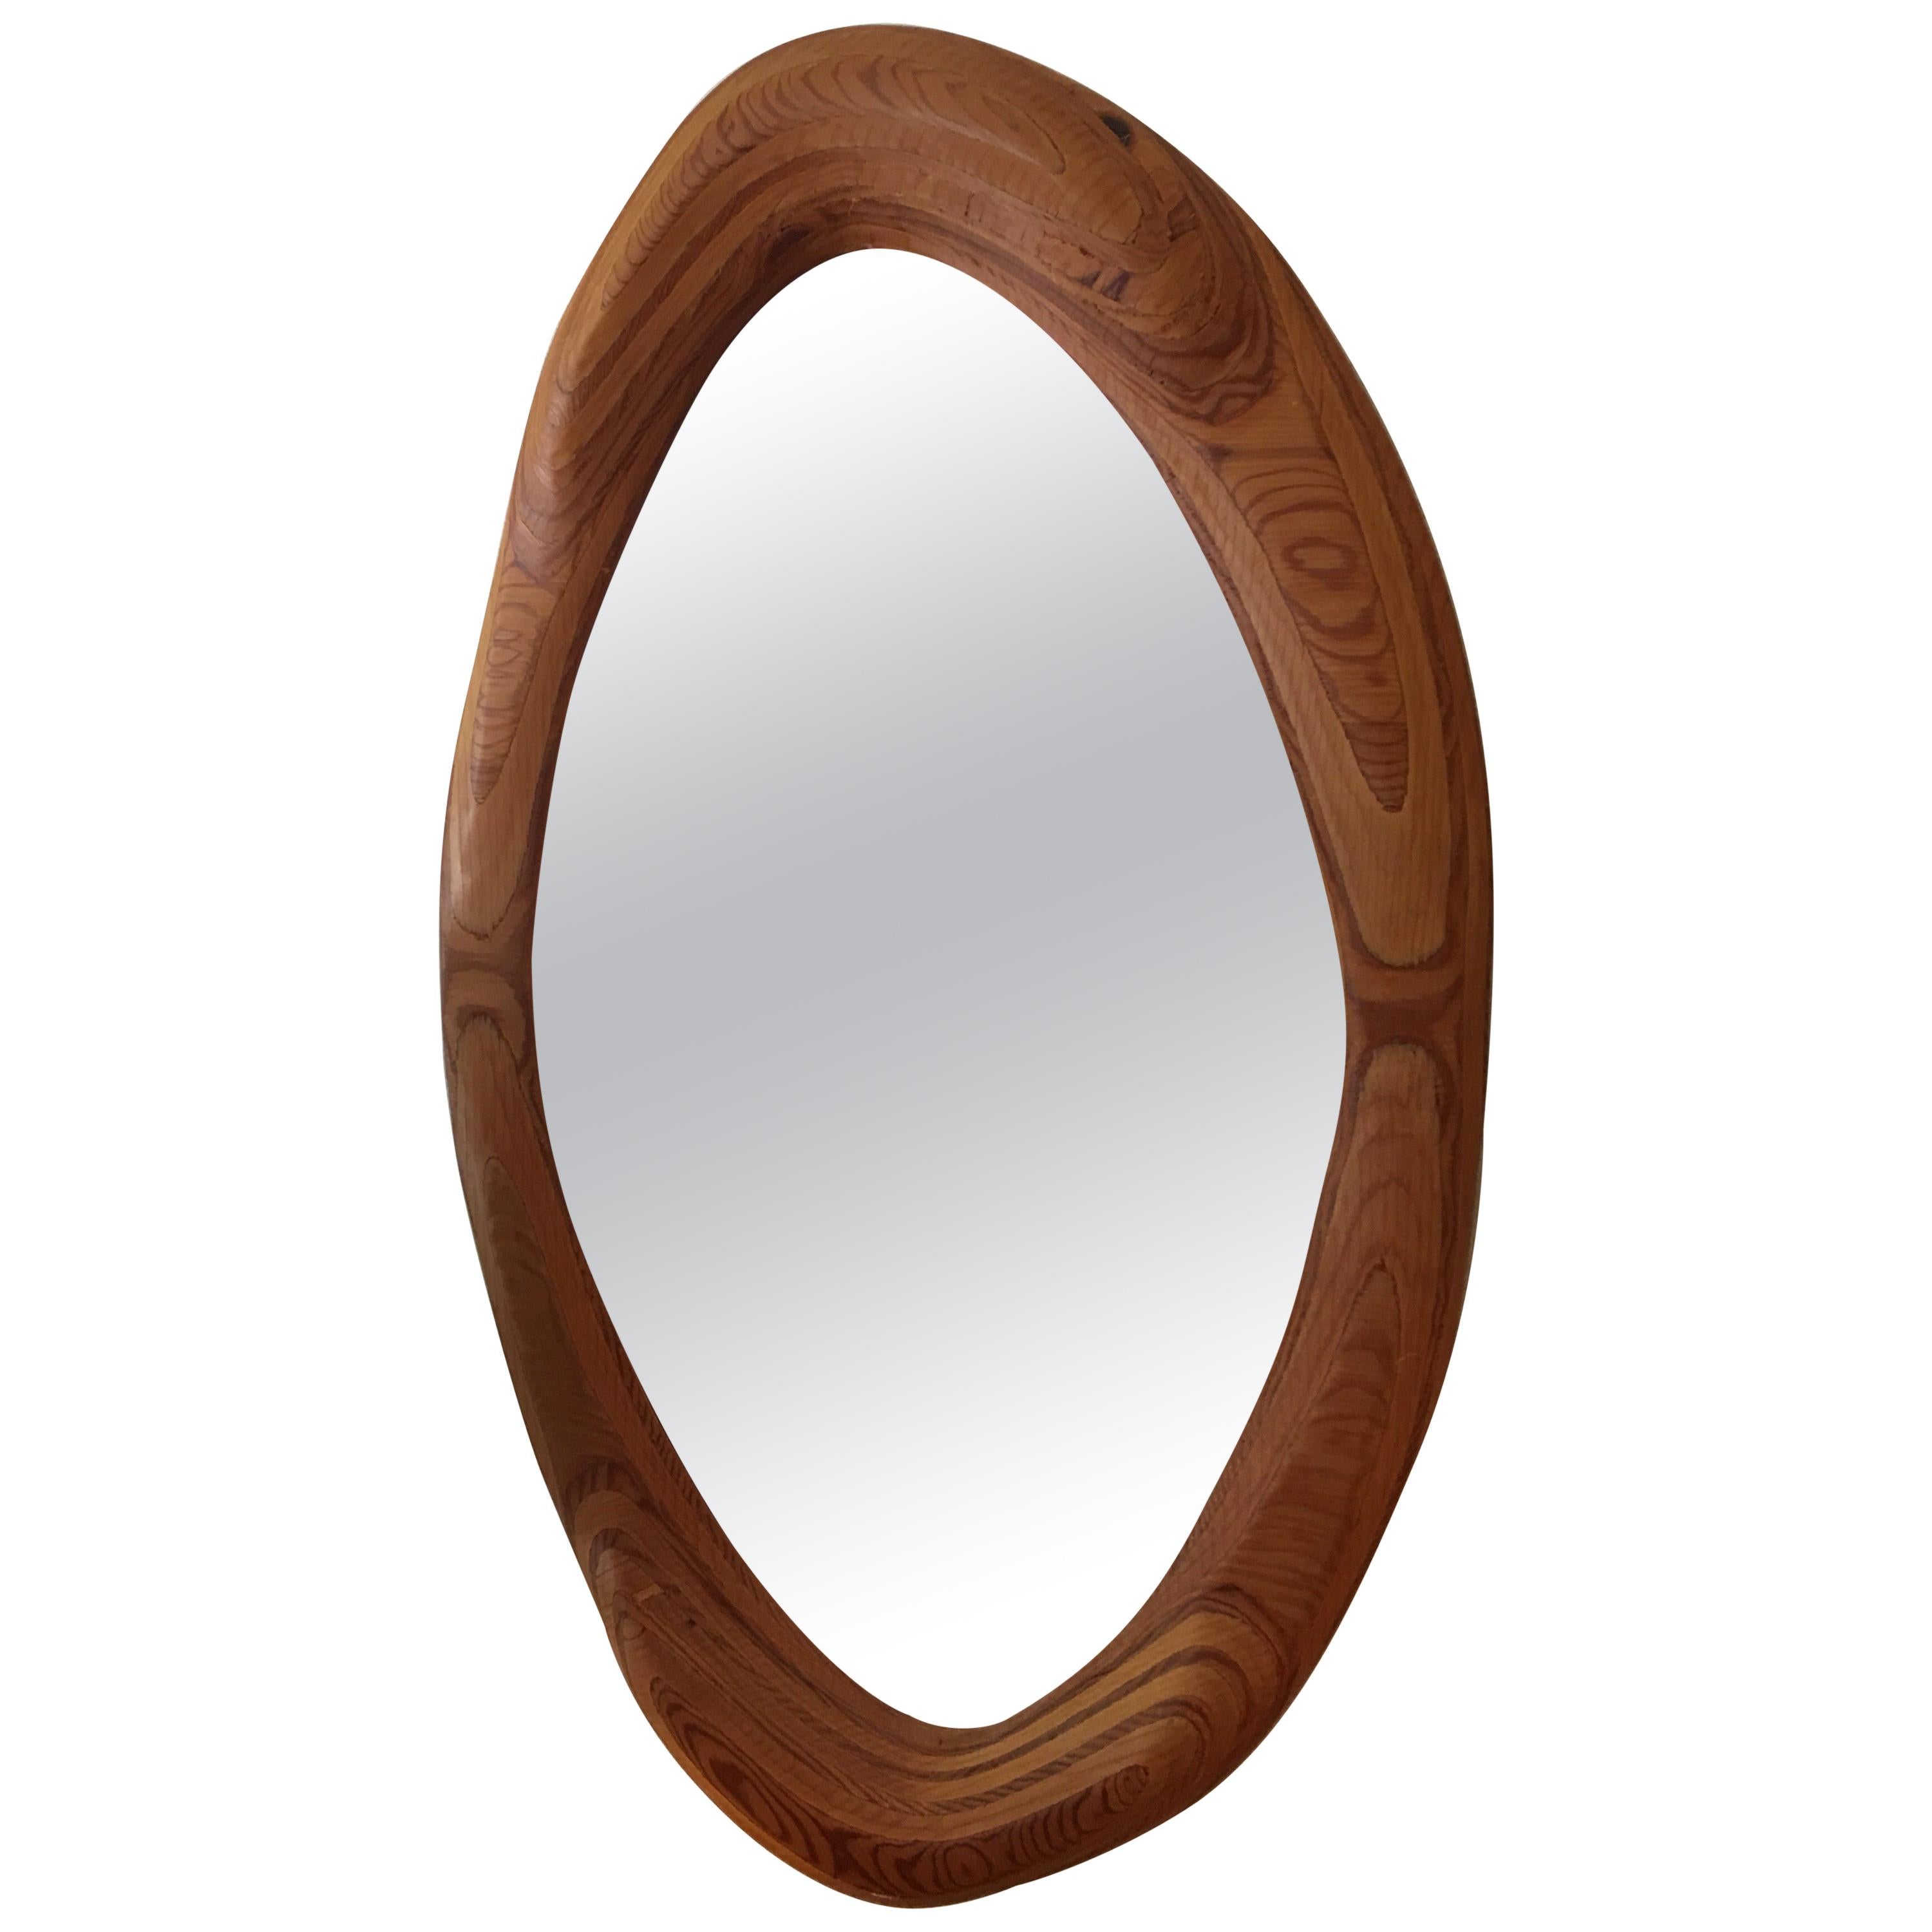 American Craft Sculpted Plywood Mirror